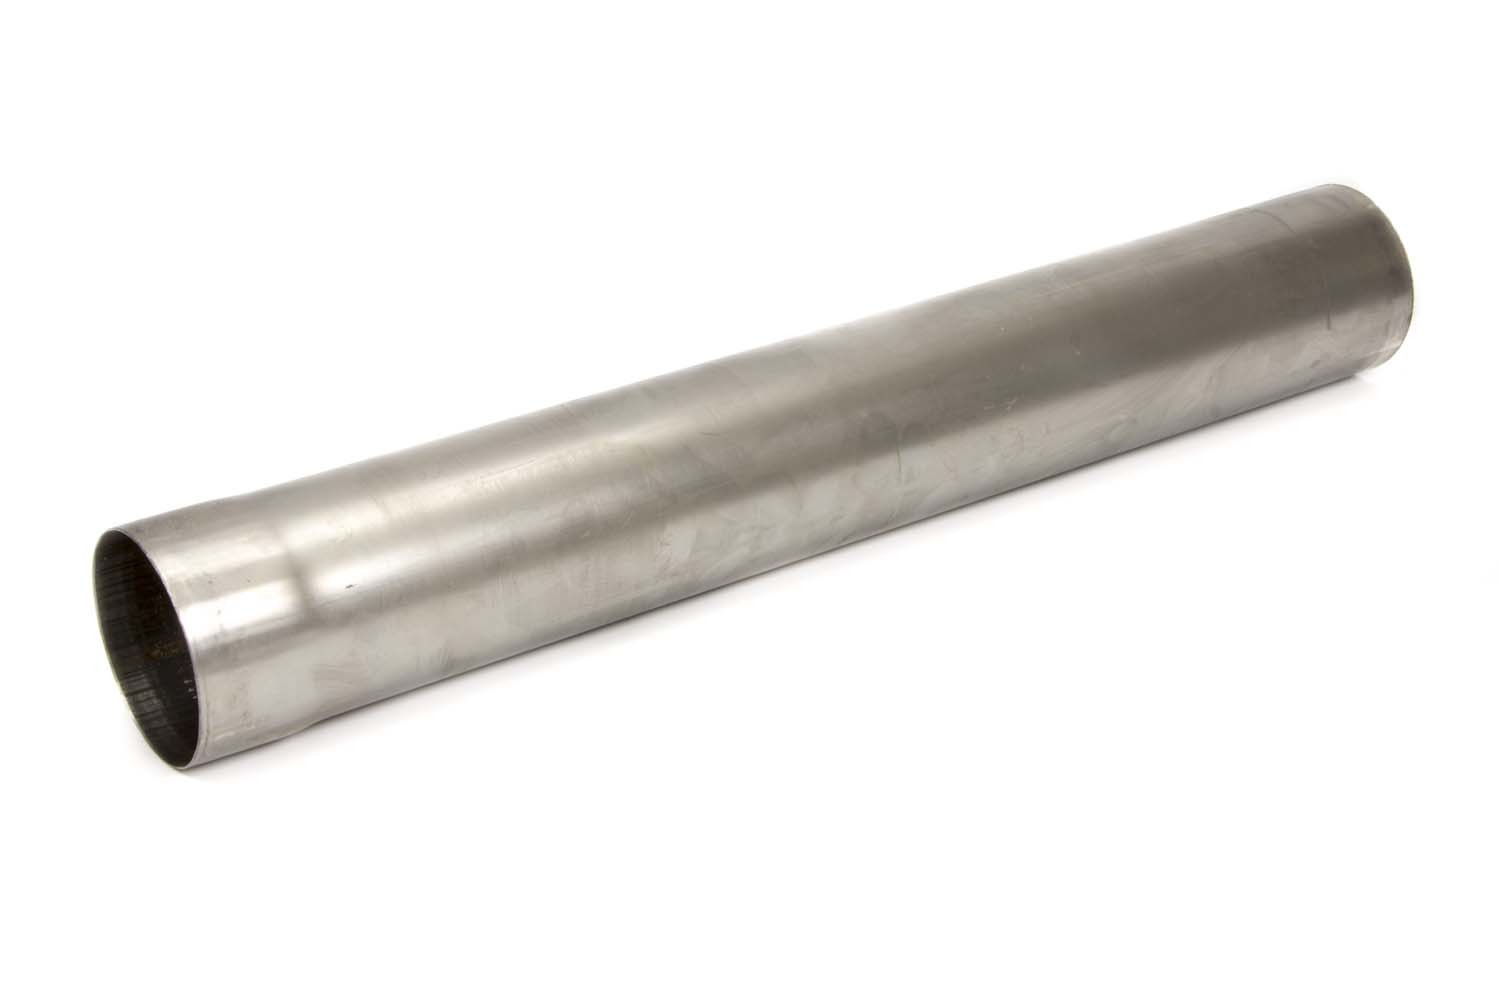 Schoenfeld Headers 240035 - Exhaust Pipe Extension, Straight, 3-1/2 in Diameter, 2 ft Long, 1 End Expanded, Steel, Natural, Each